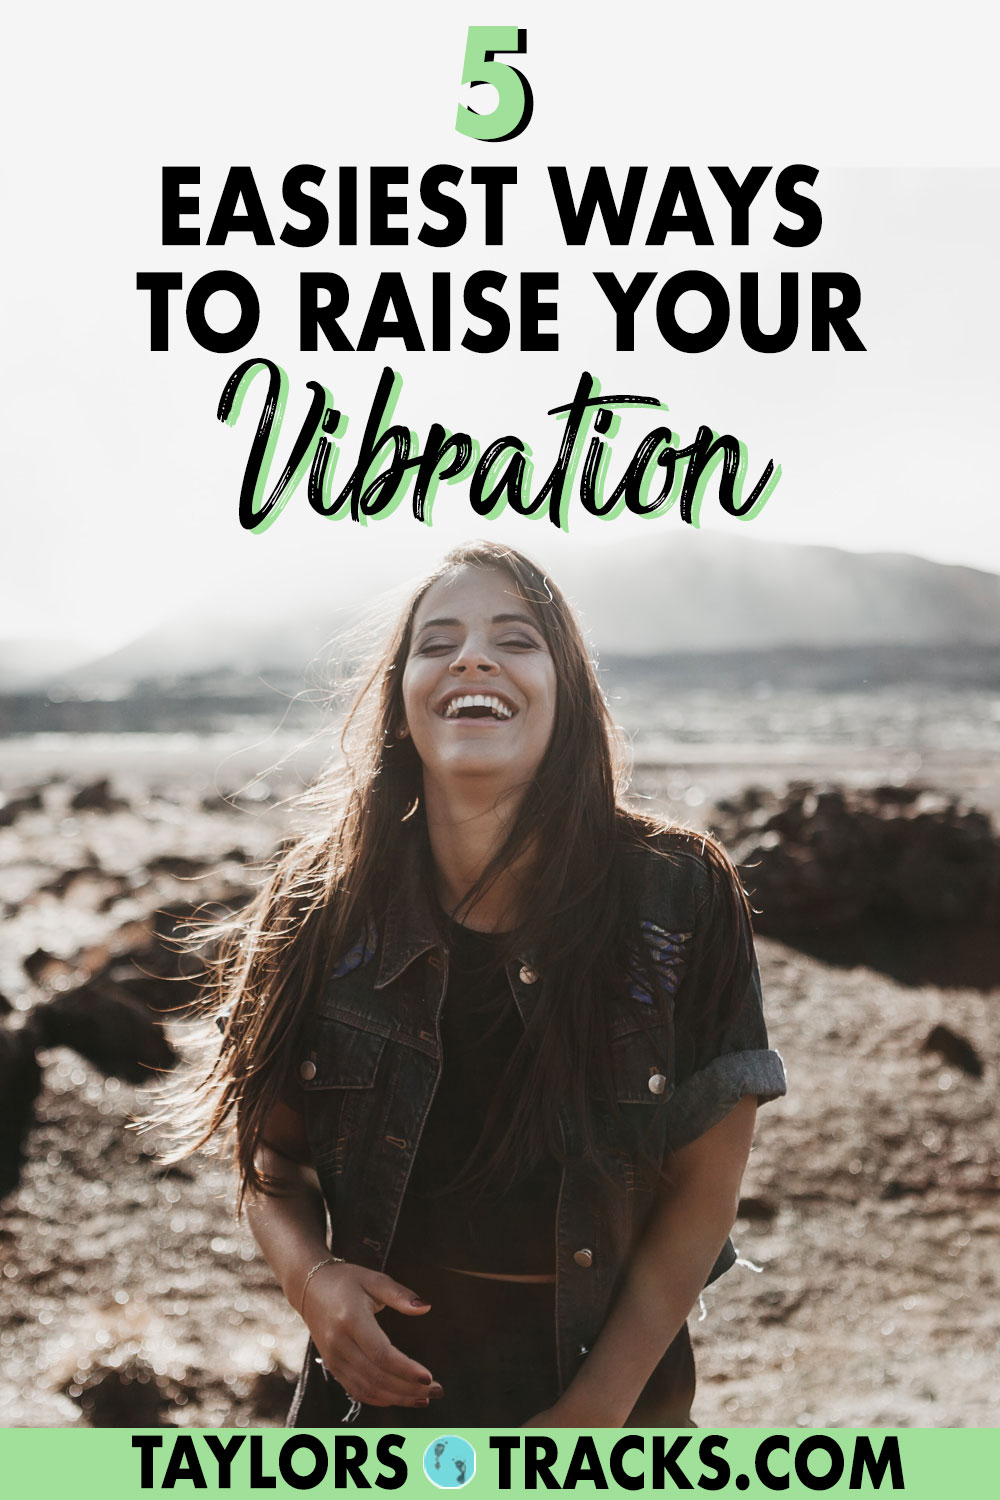 Live your best life by tuning into your vibration and learning the simple tools that you can use daily to raise your vibe, raise your frequency and have you feeling amazing. These 5 ways to raise your vibe change your mood quick and can be used at any time and anywhere. Click to find out how you can boost your vibe and happiness immediately!